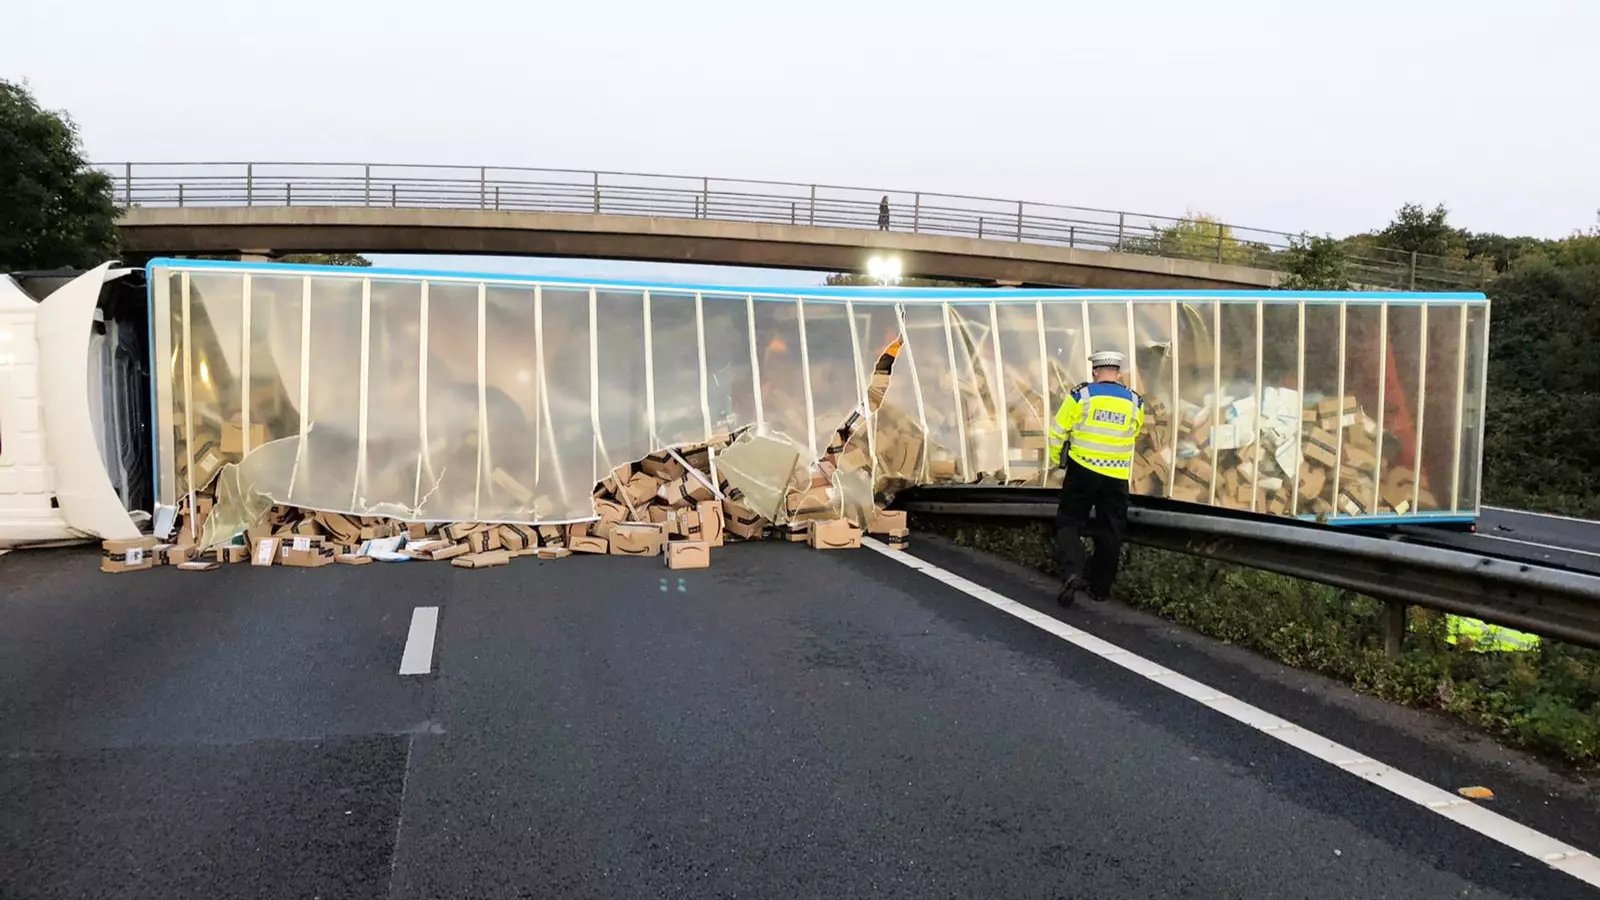 Hundreds Of Amazon Parcels Spill Over A27 After Lorry Crashes